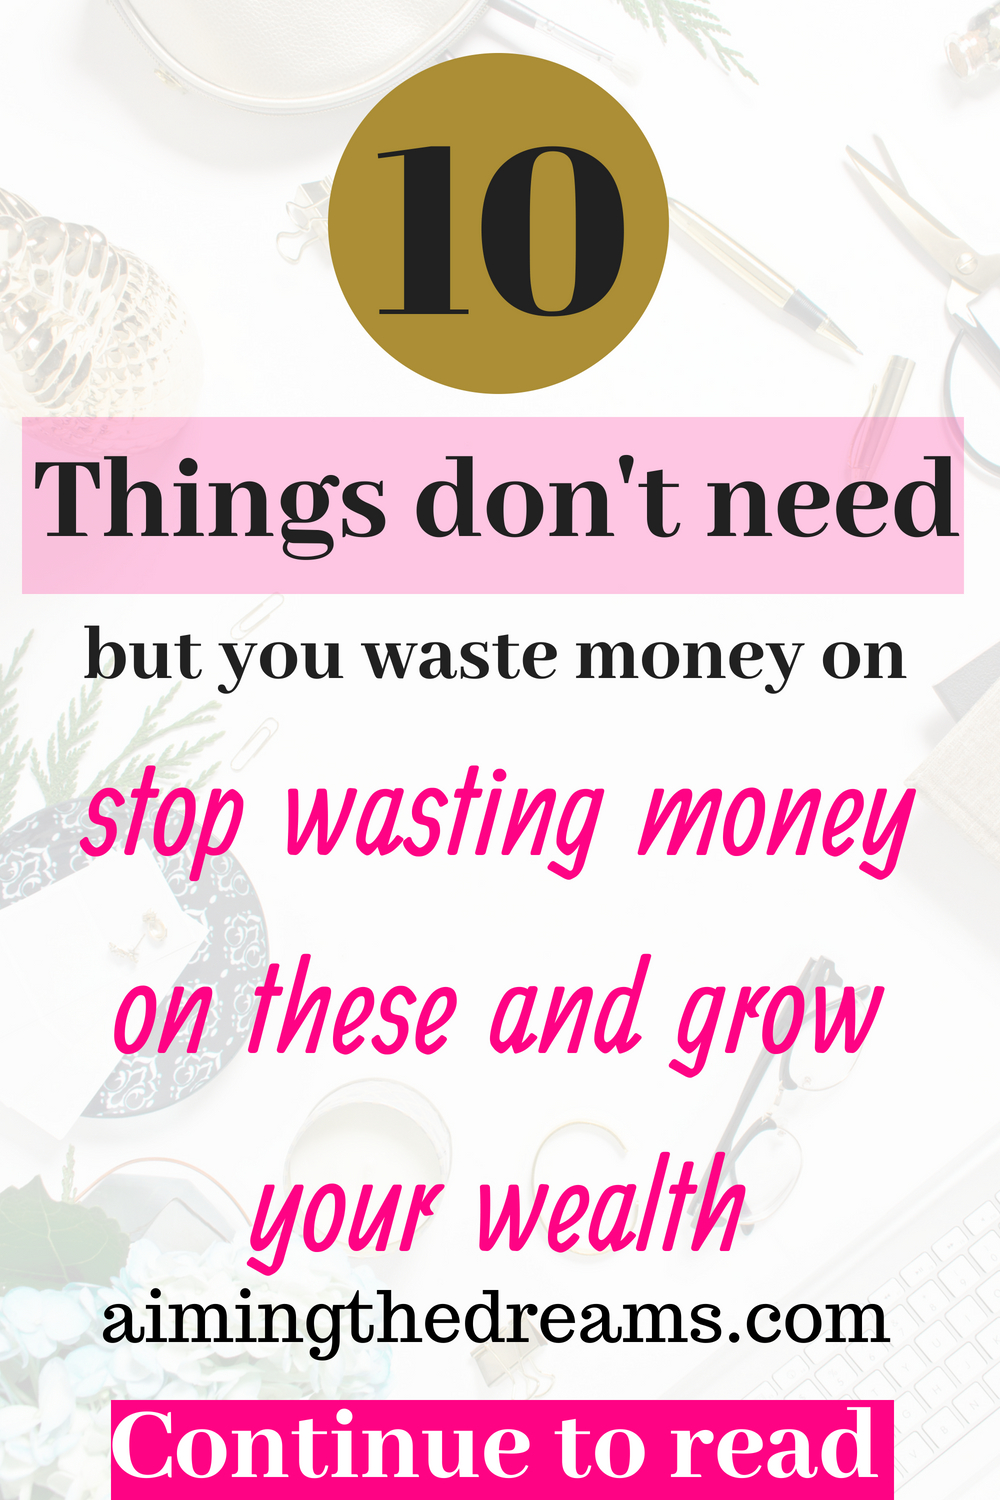 There is differenc ein what we need and what we want. Spending money in those materialistic things which we don't need is not wise. #Saving accounts grow when you stop wasting money on things you really don't need.t 